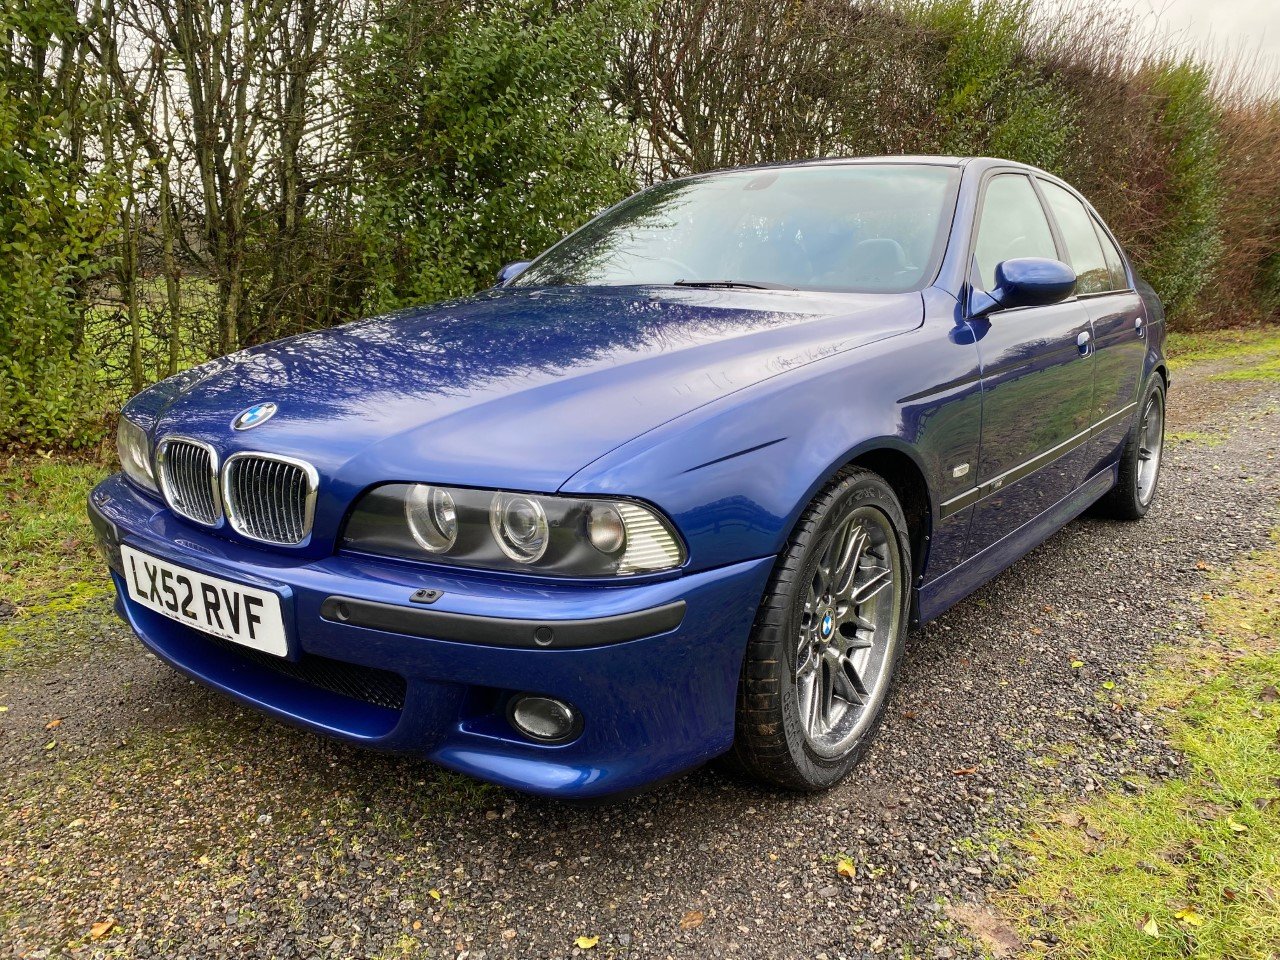 BMW E39 M5 - Late 2002, High Spec Example 